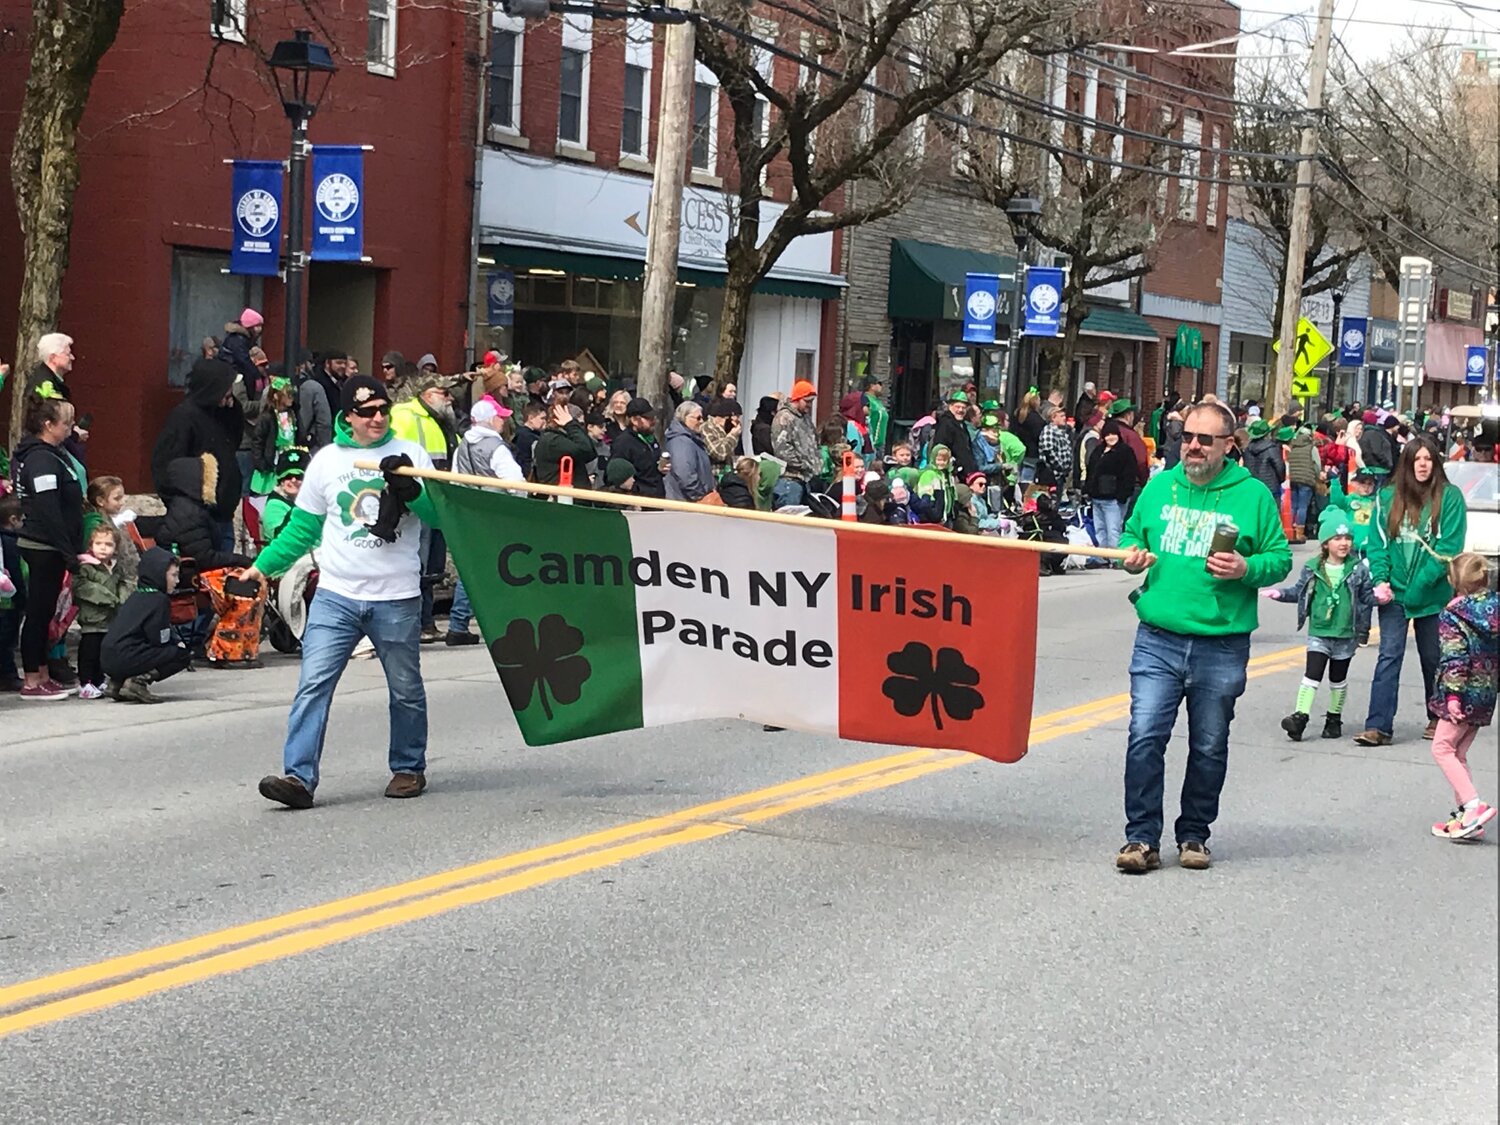 A wave of green washed down Main Street Saturday, March 18 as the annual Camden NY Irish Parade returned to celebrate the St. Patrick's Day holiday.